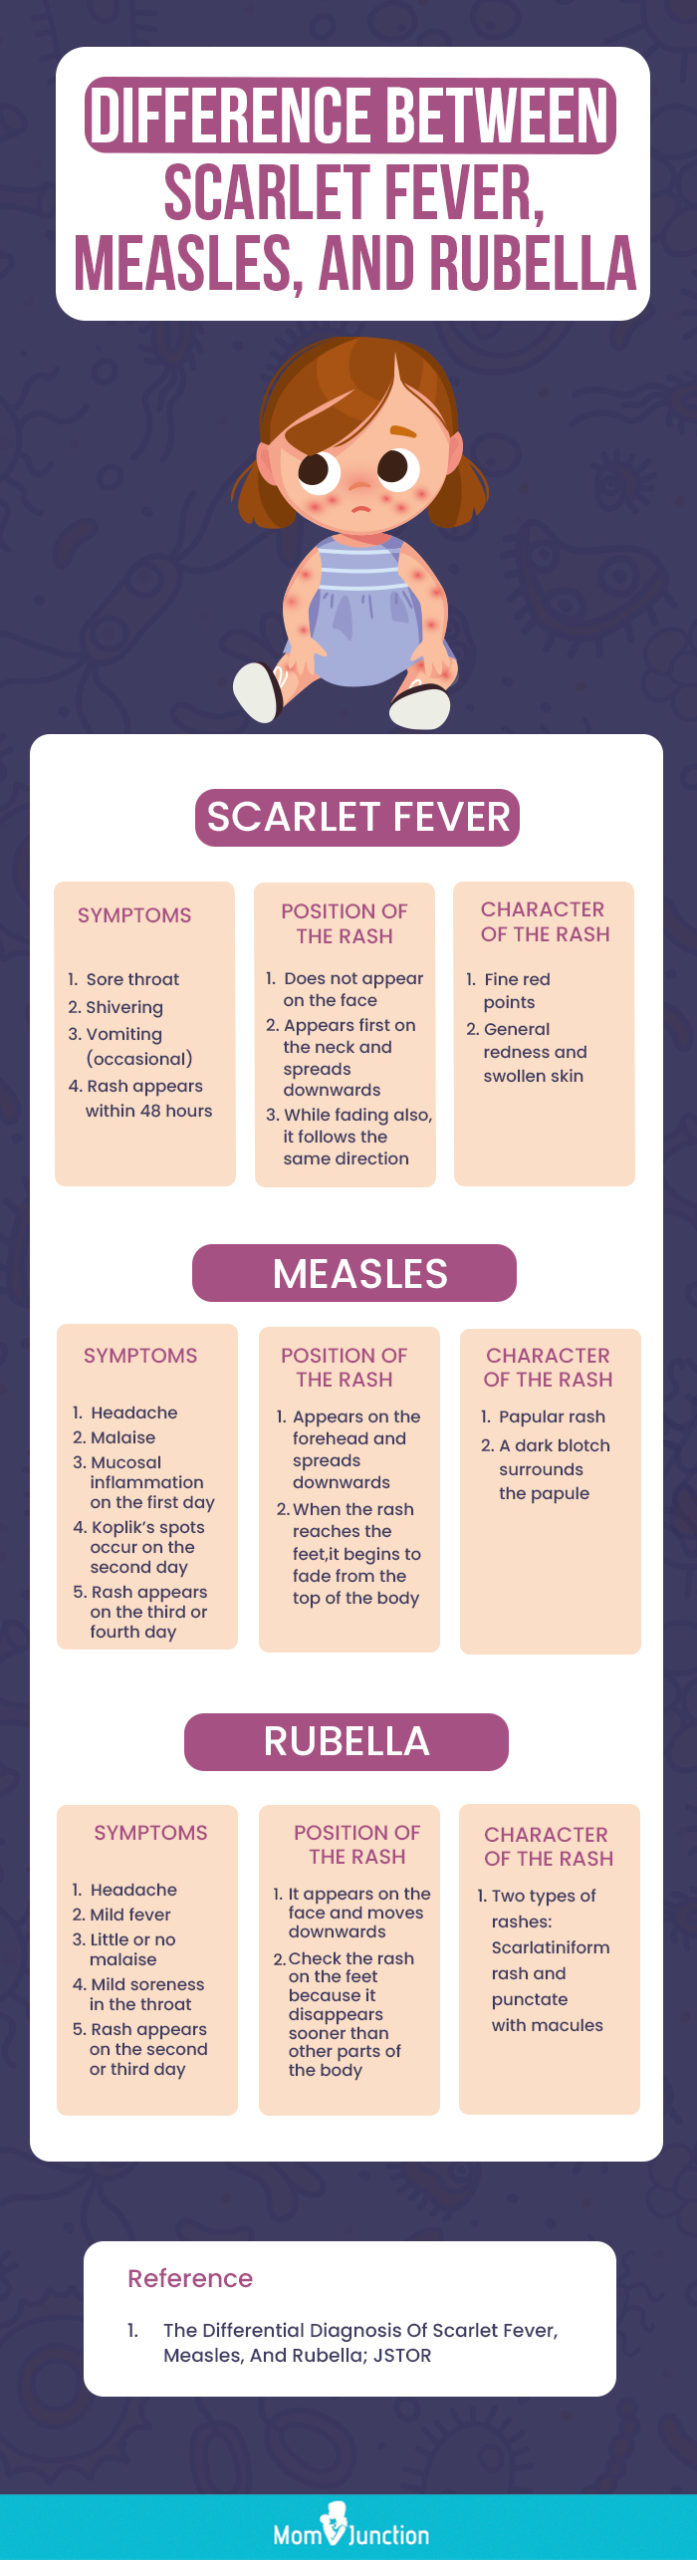 difference between scarlet fever measles and rubella (infographic)